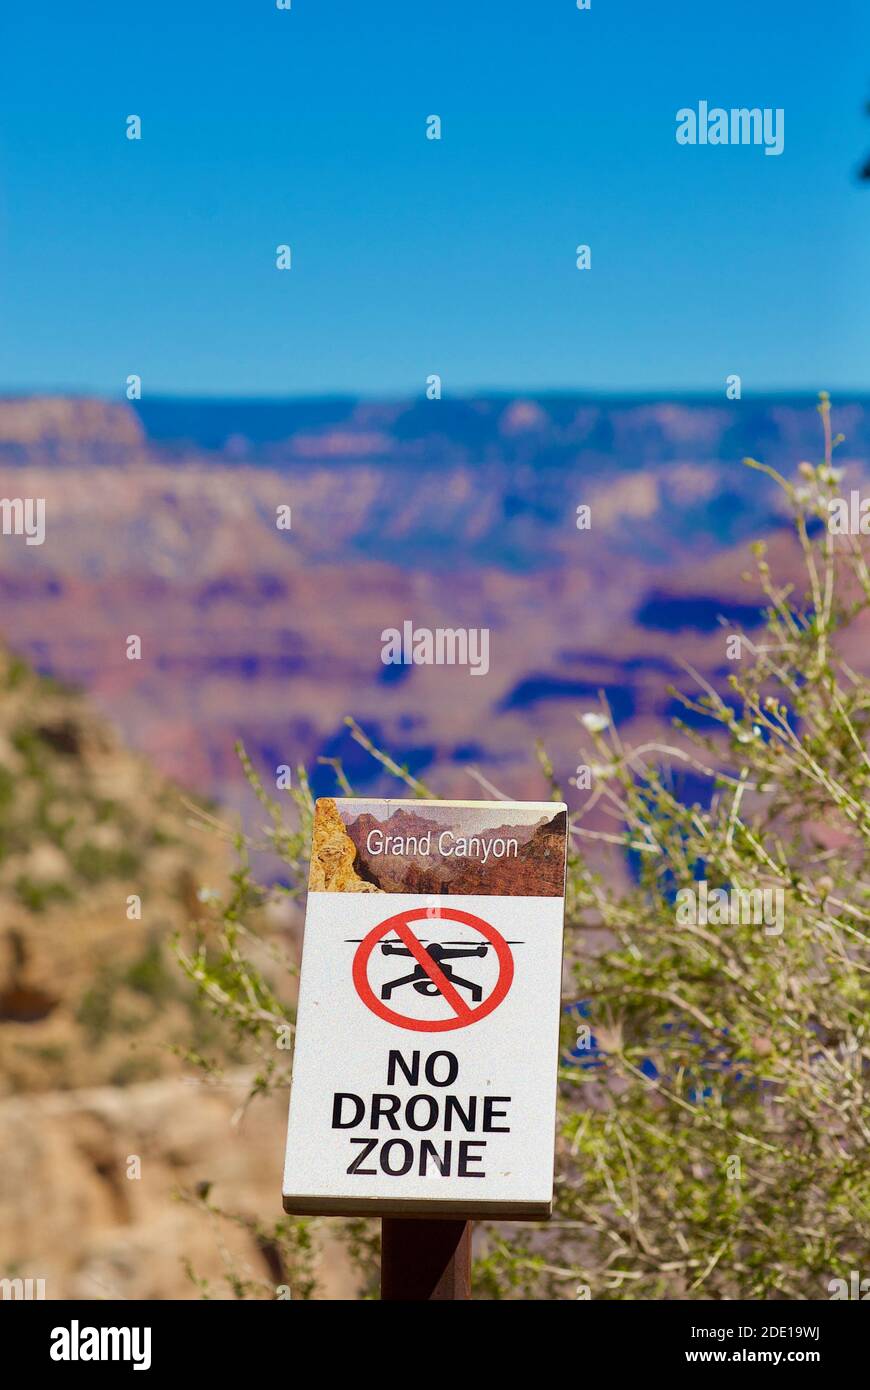 Grand Canyon National Park, Arizona, USA - July 29, 2020: A 'No Drone Zone' sign reminds visitors it is illegal to fly drones over the Grand Canyon. Stock Photo